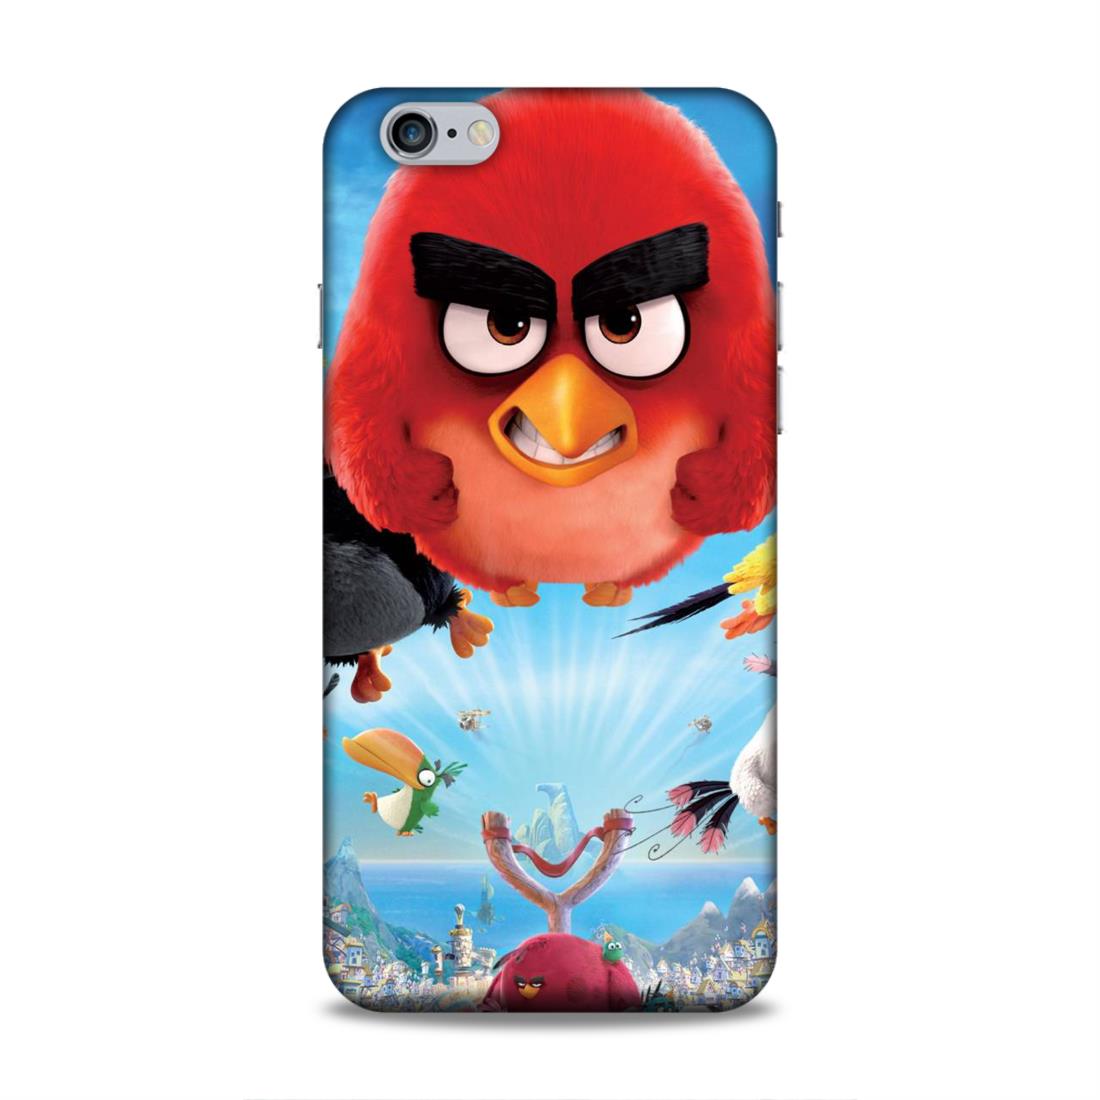 Flying Angry Bird Hard Back Case For Apple iPhone 6 Plus / 6s Plus